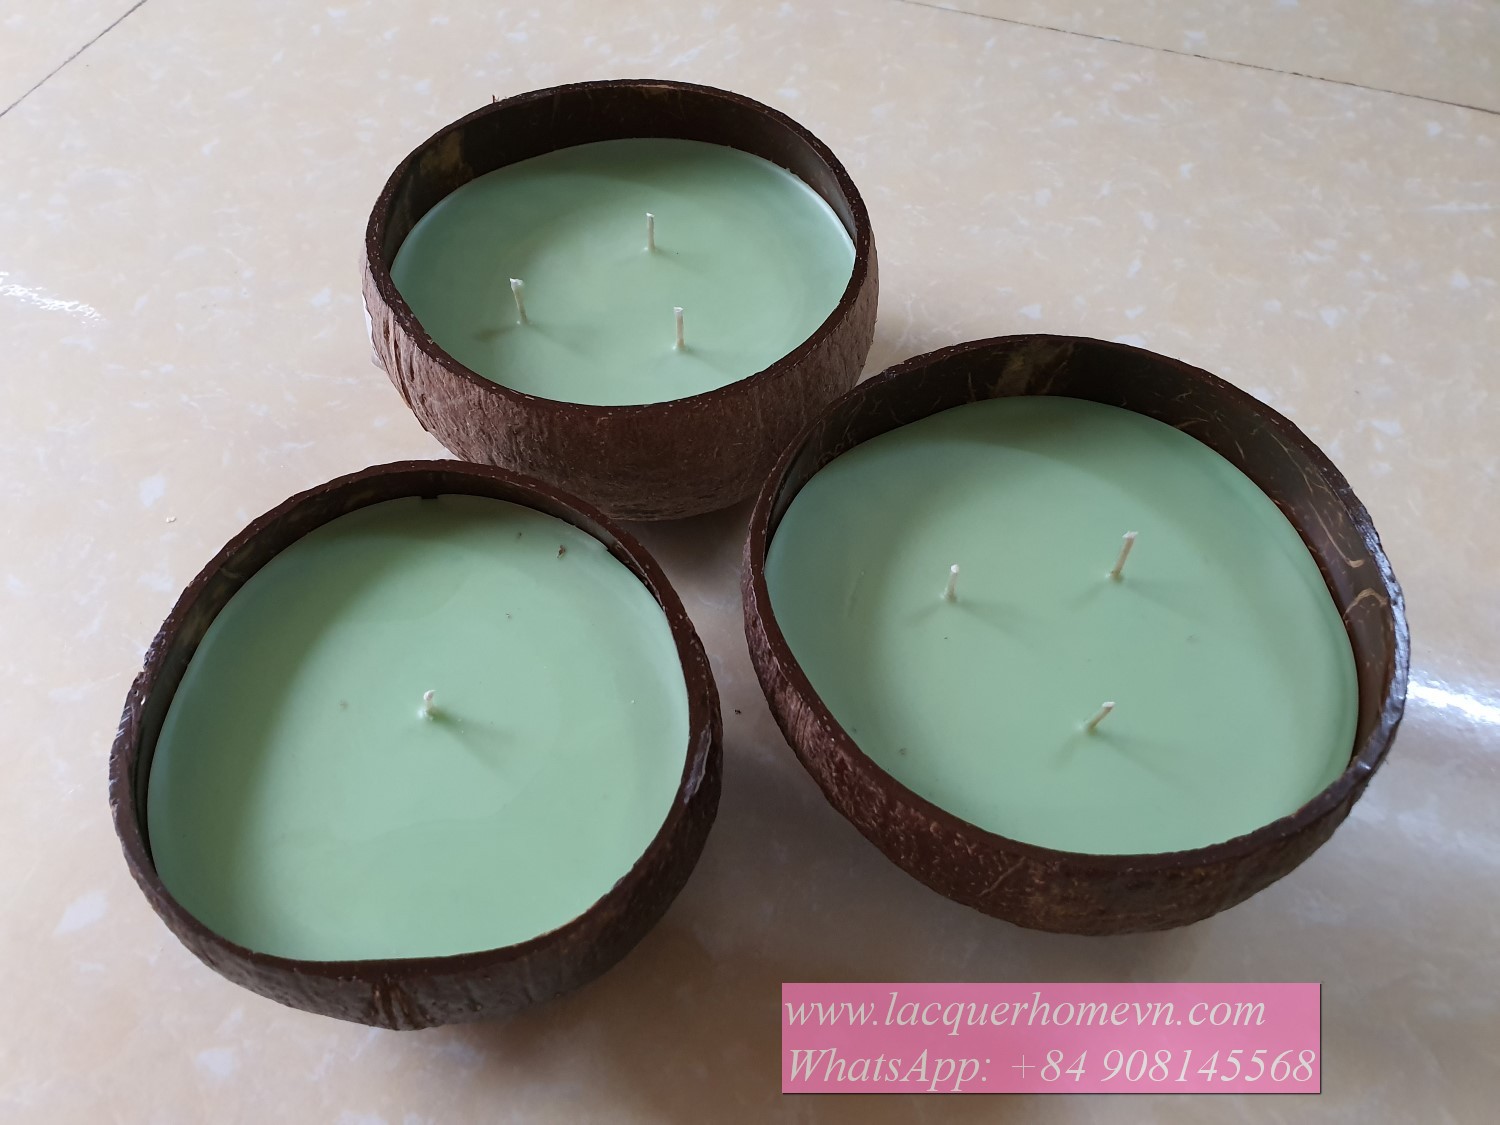 SOywax canddle coconut shell bowl